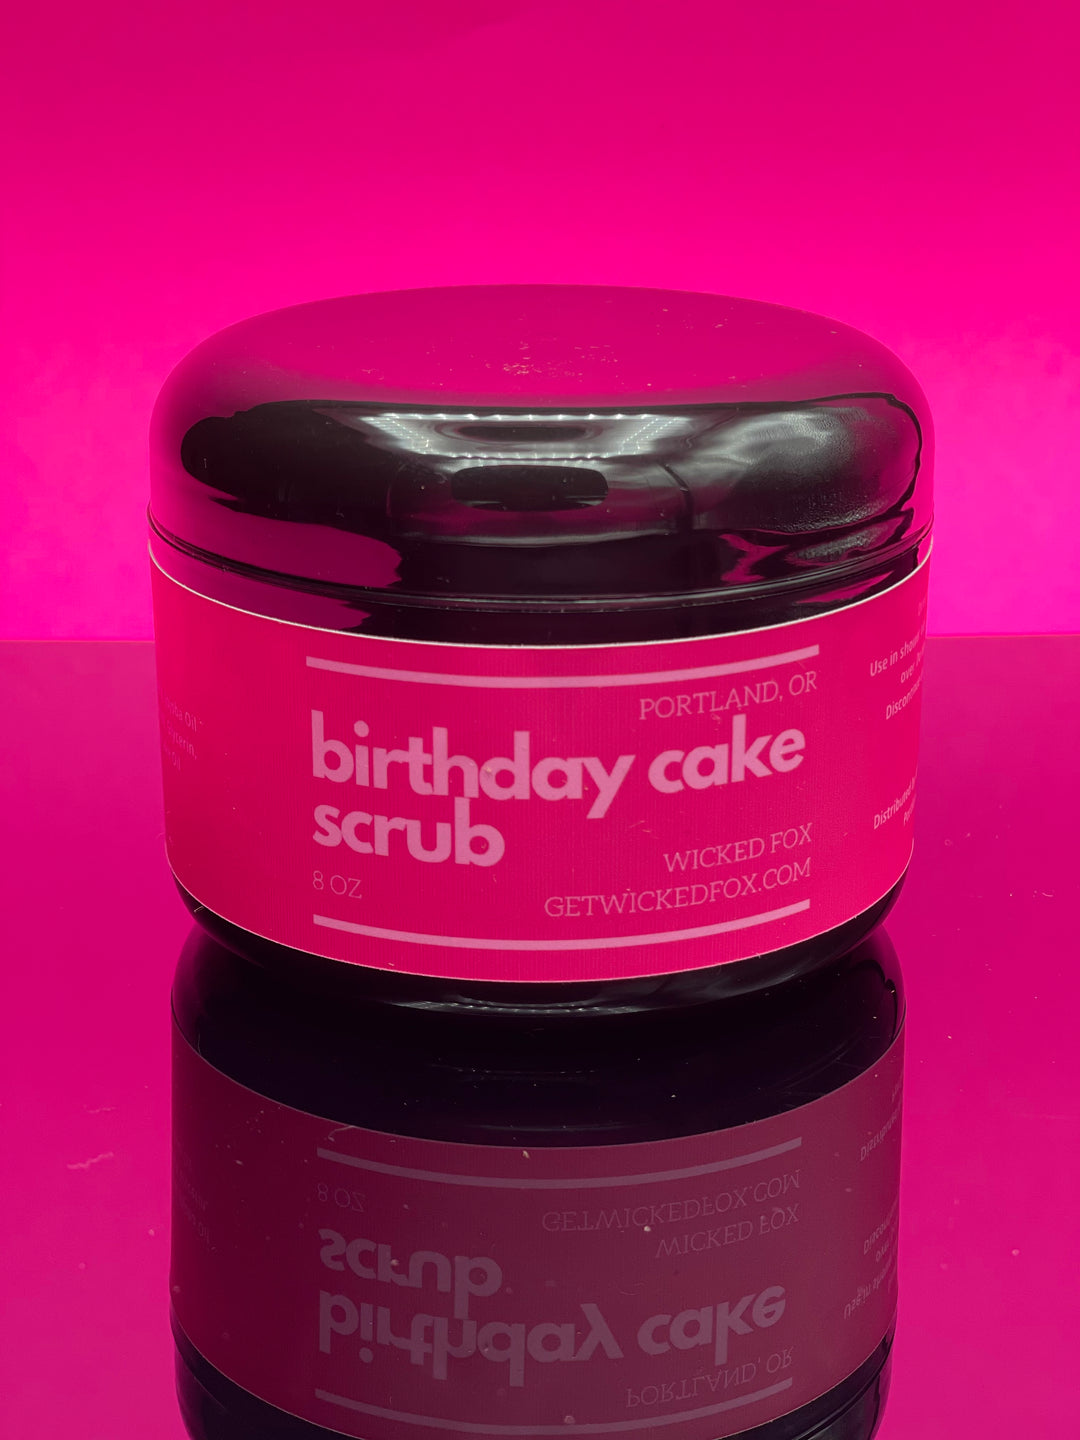 Introducing the Wicked Fox Birthday Cake Scrub, proudly made in Portland. This indulgent body scrub is the perfect choice for gay men seeking to reduce butt acne or stretch marks. Treat your skin with this luxurious formula and feel confident in your own skin. Also, check out our range of stylish jockstraps to complete your empowered and fashionable look. Embrace self-care and elevate your skincare routine with Wicked Fox."